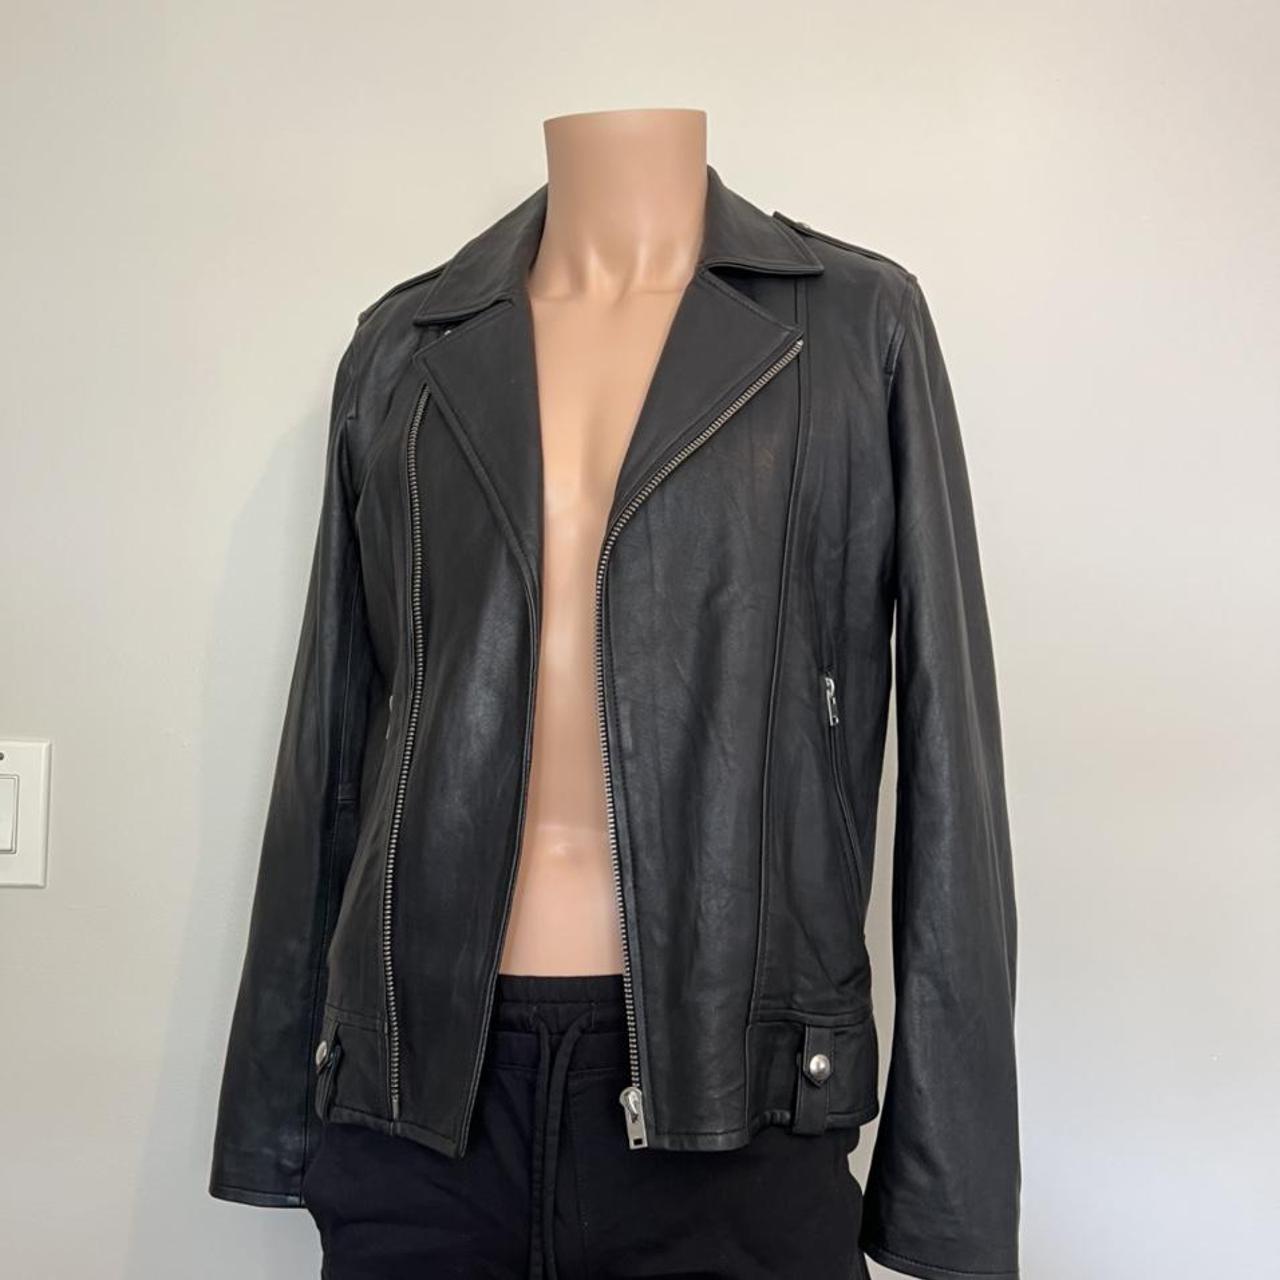 IRO leather biker jacket in a size mens small. This... - Depop